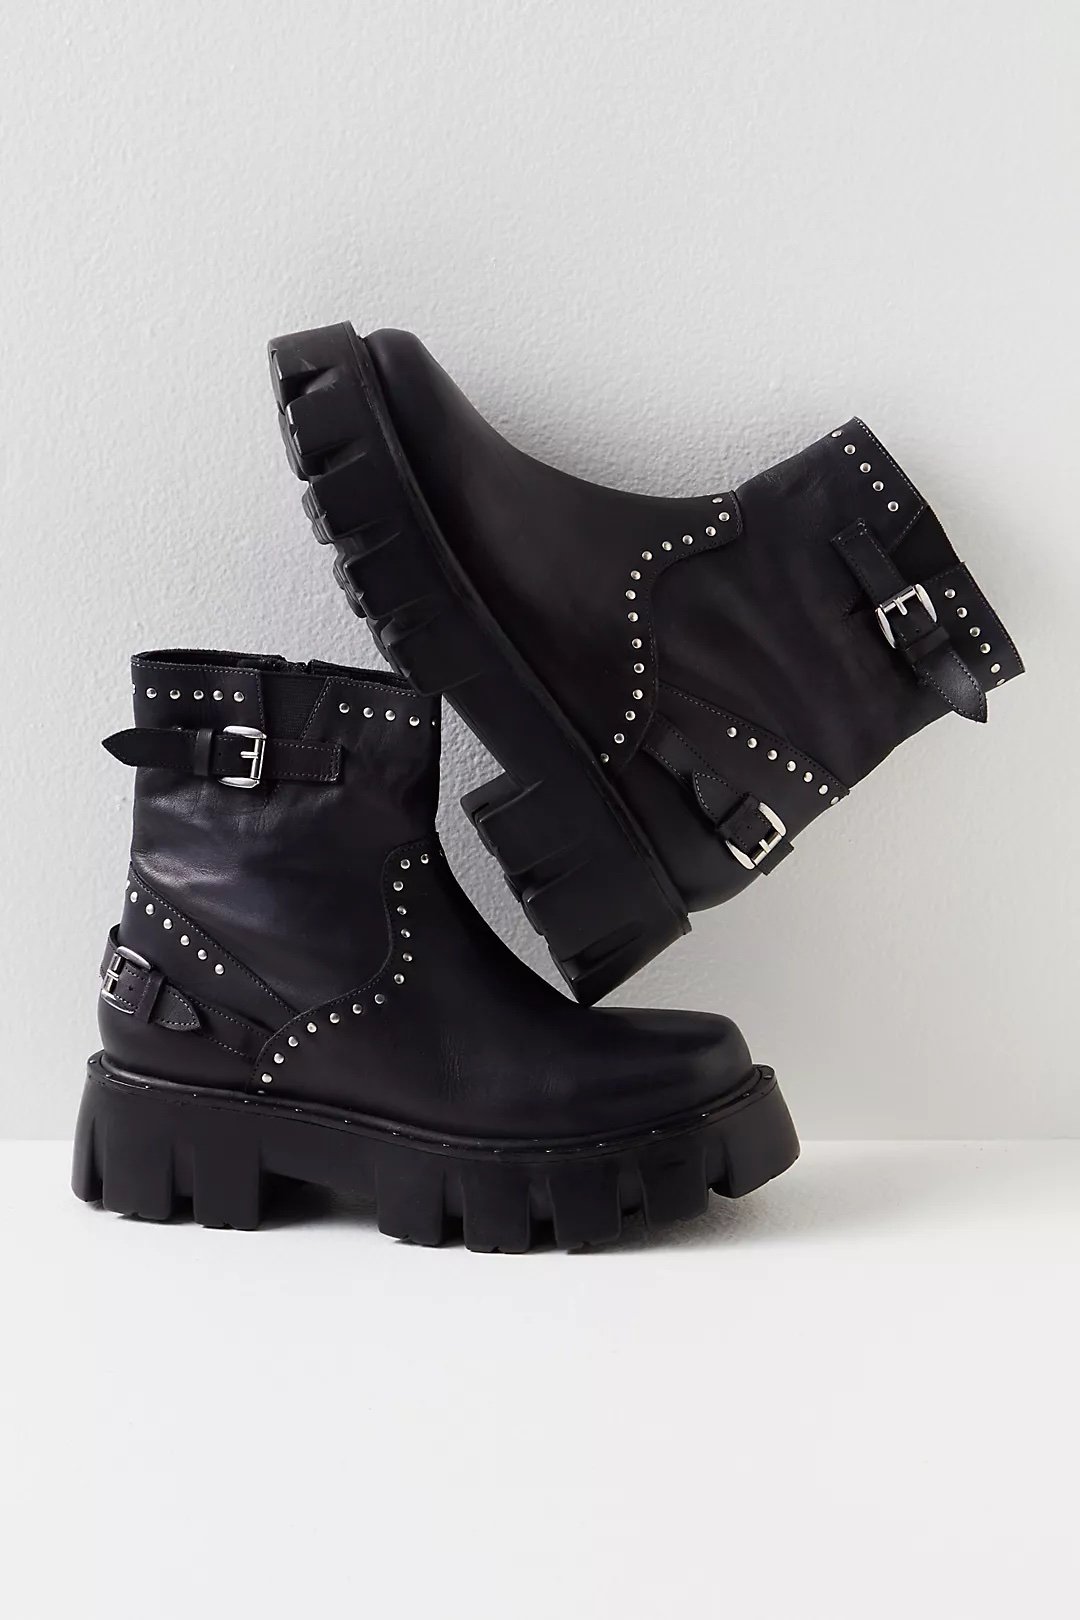 Ludlow Studded Moto Boots